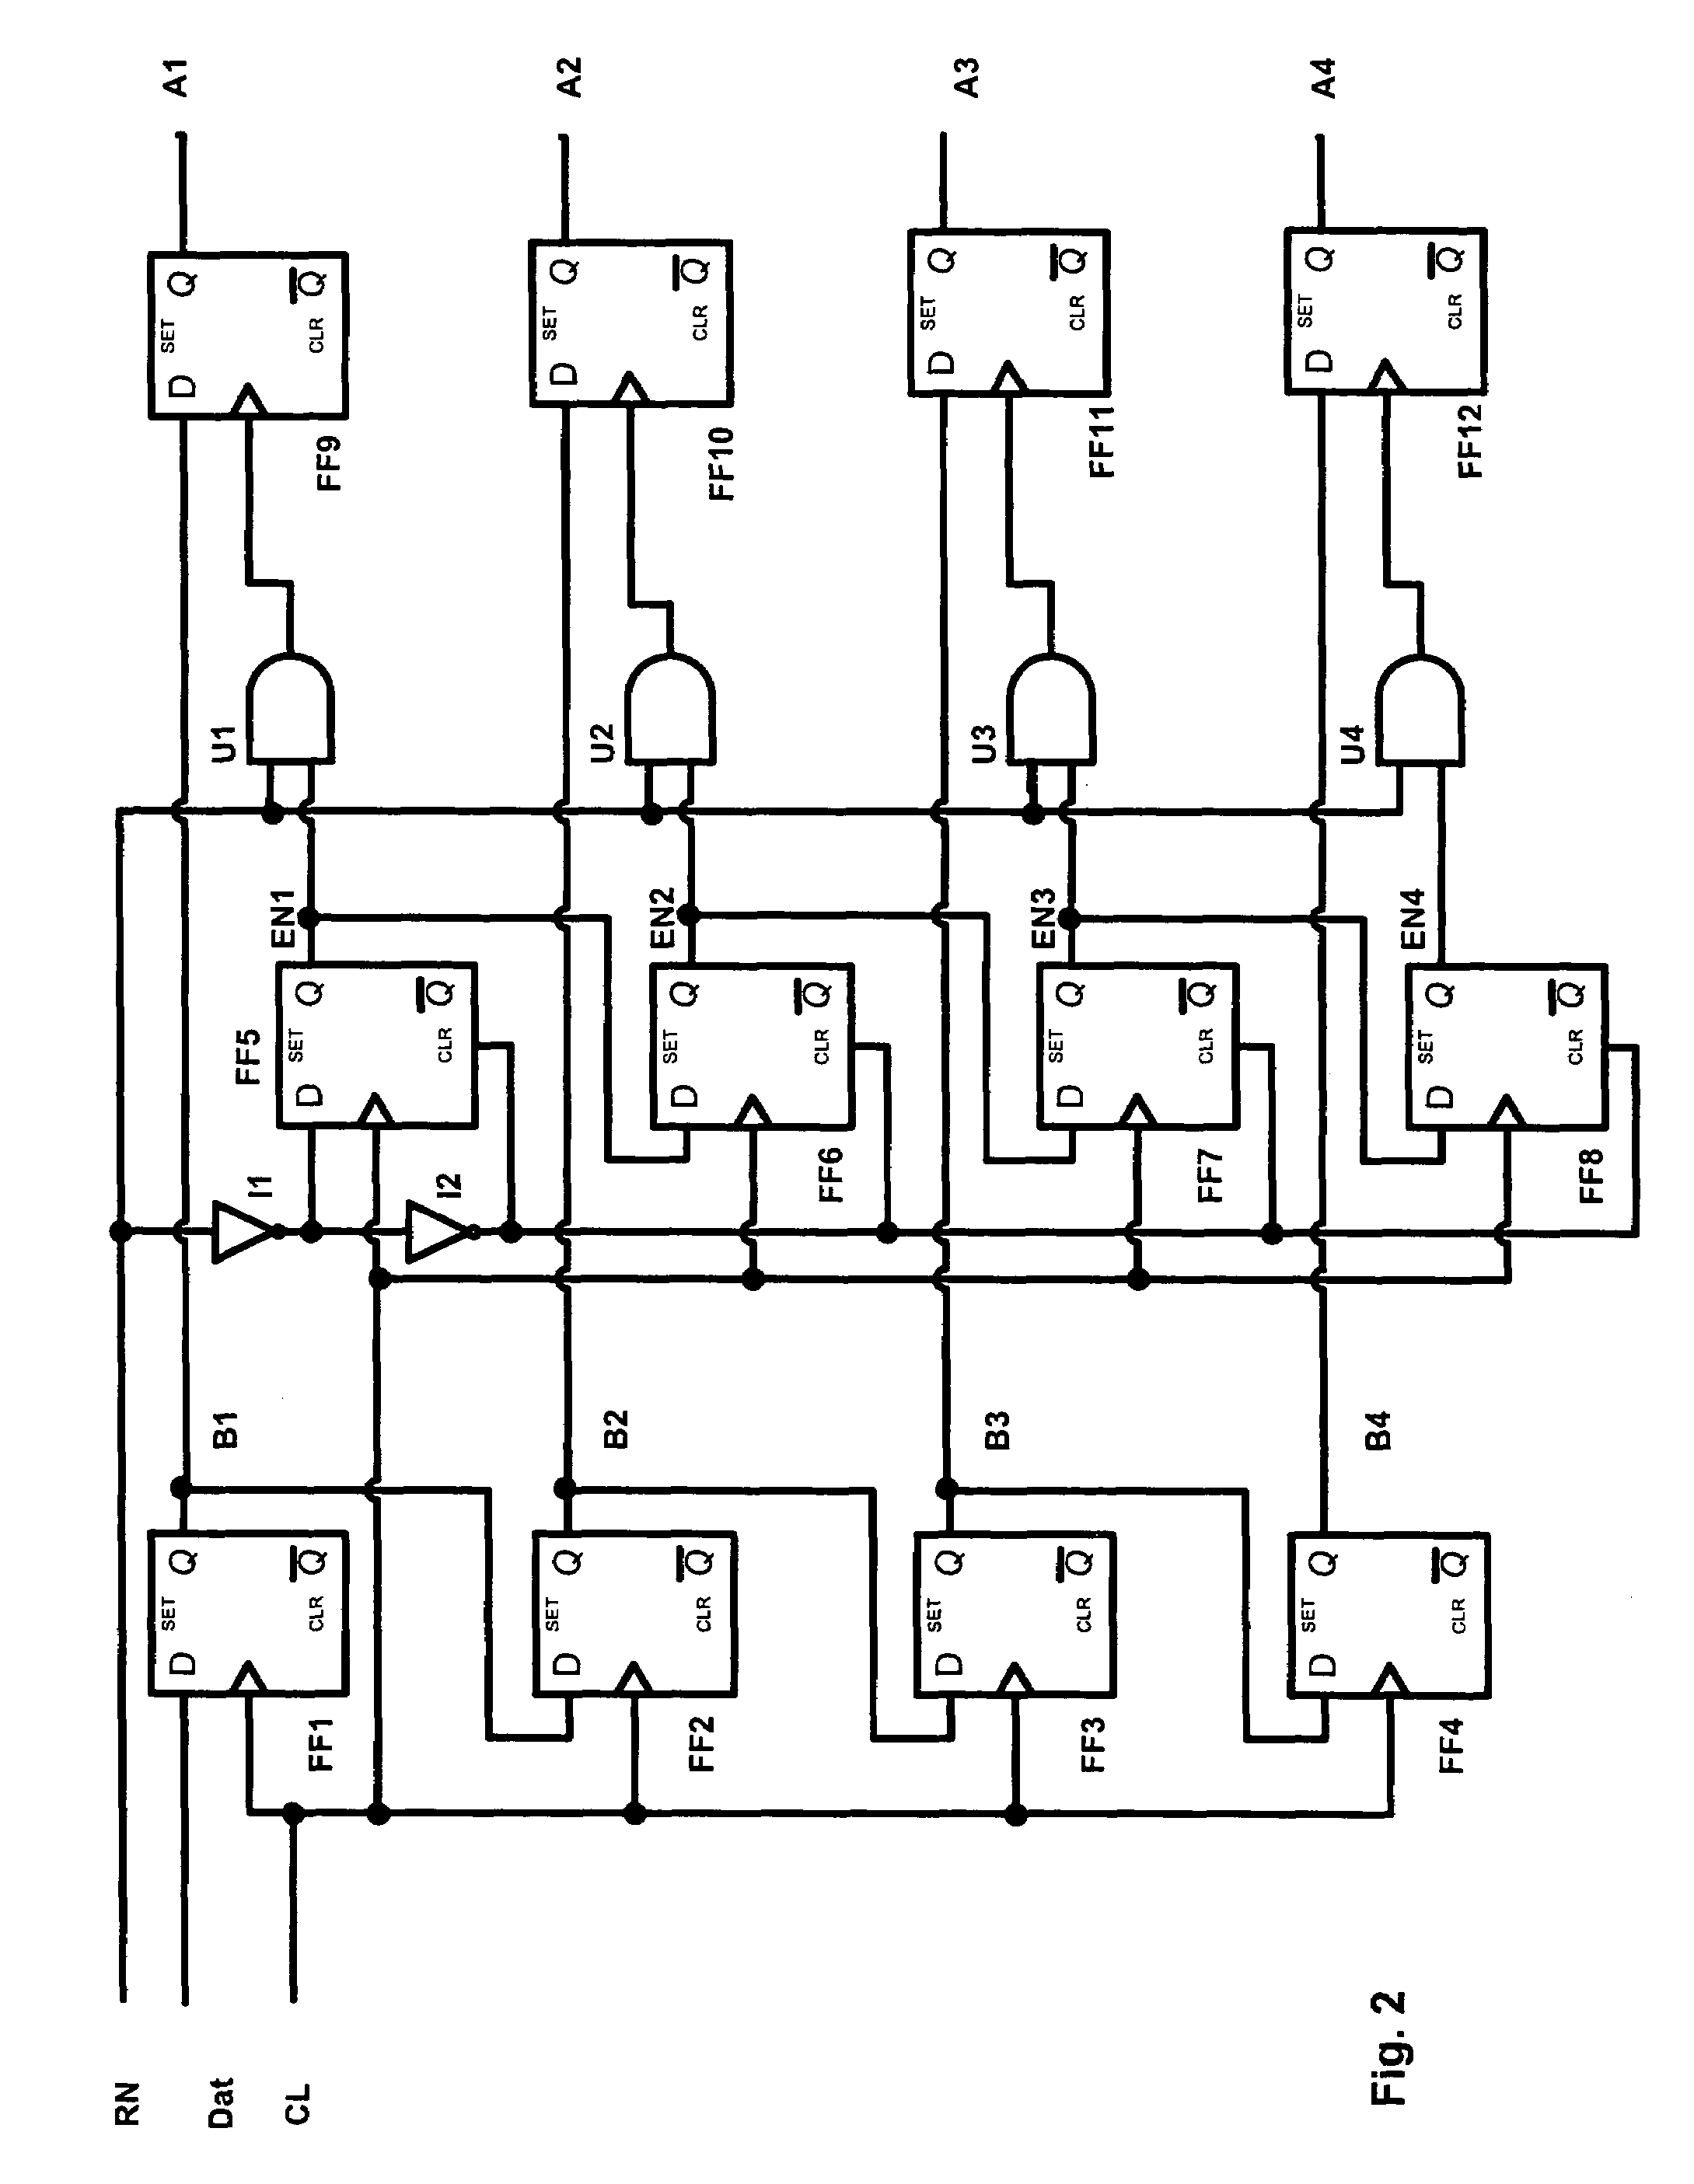 Serial data transfer in a numerically controlled control system to update an output value of the control system